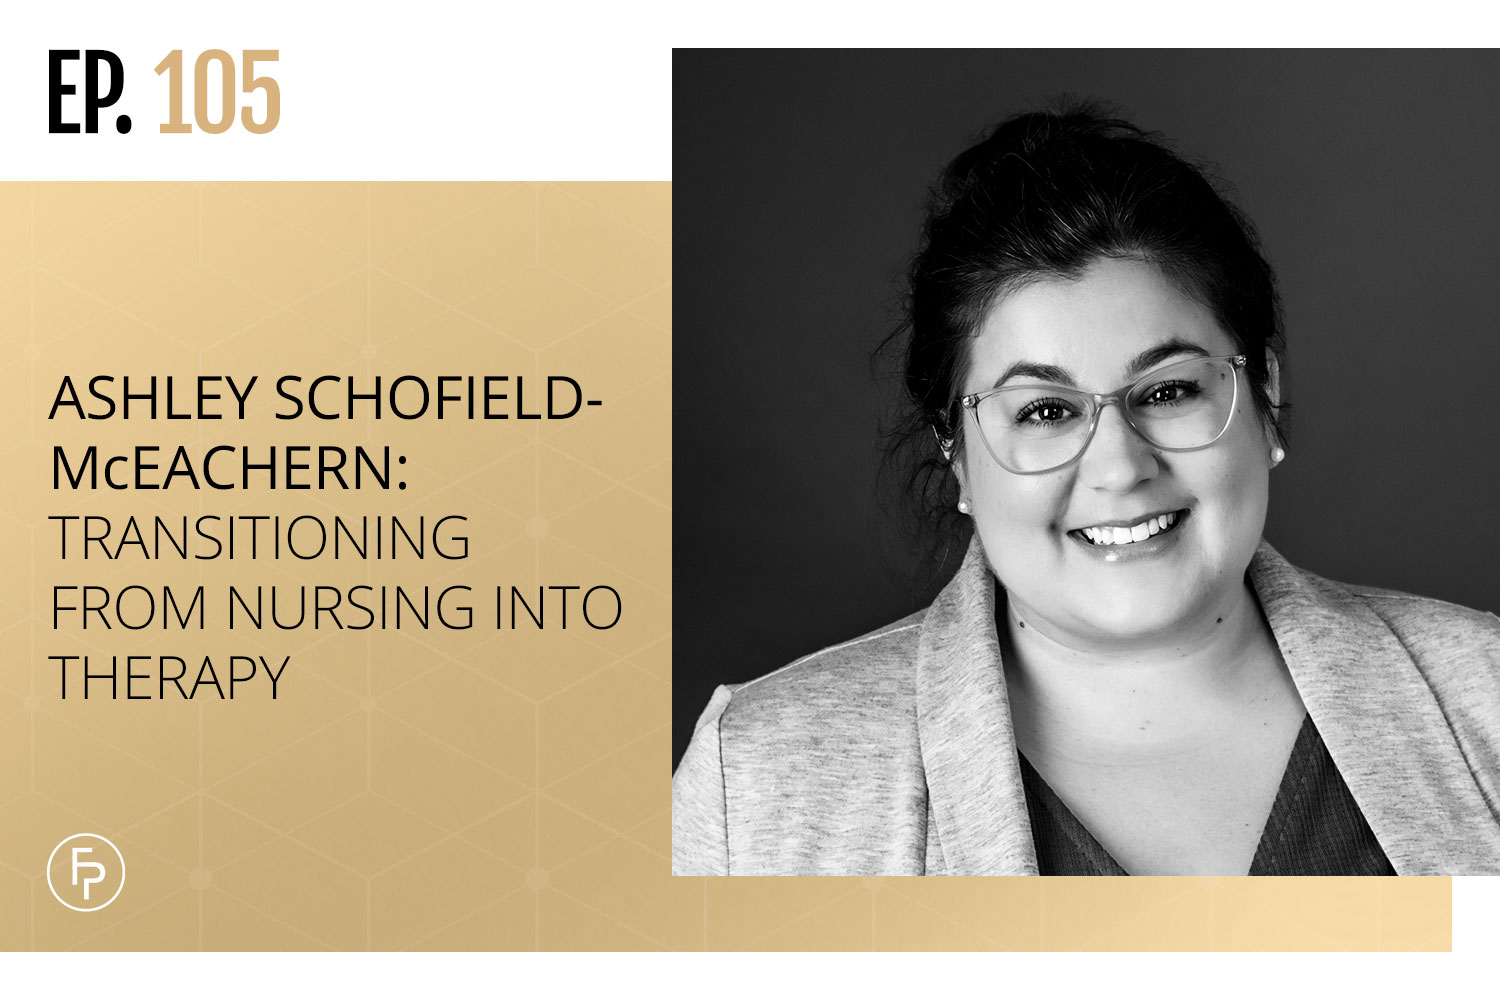 Ashley Schofield-McEachern: Transitioning From Nursing Into Therapy | Ep 105